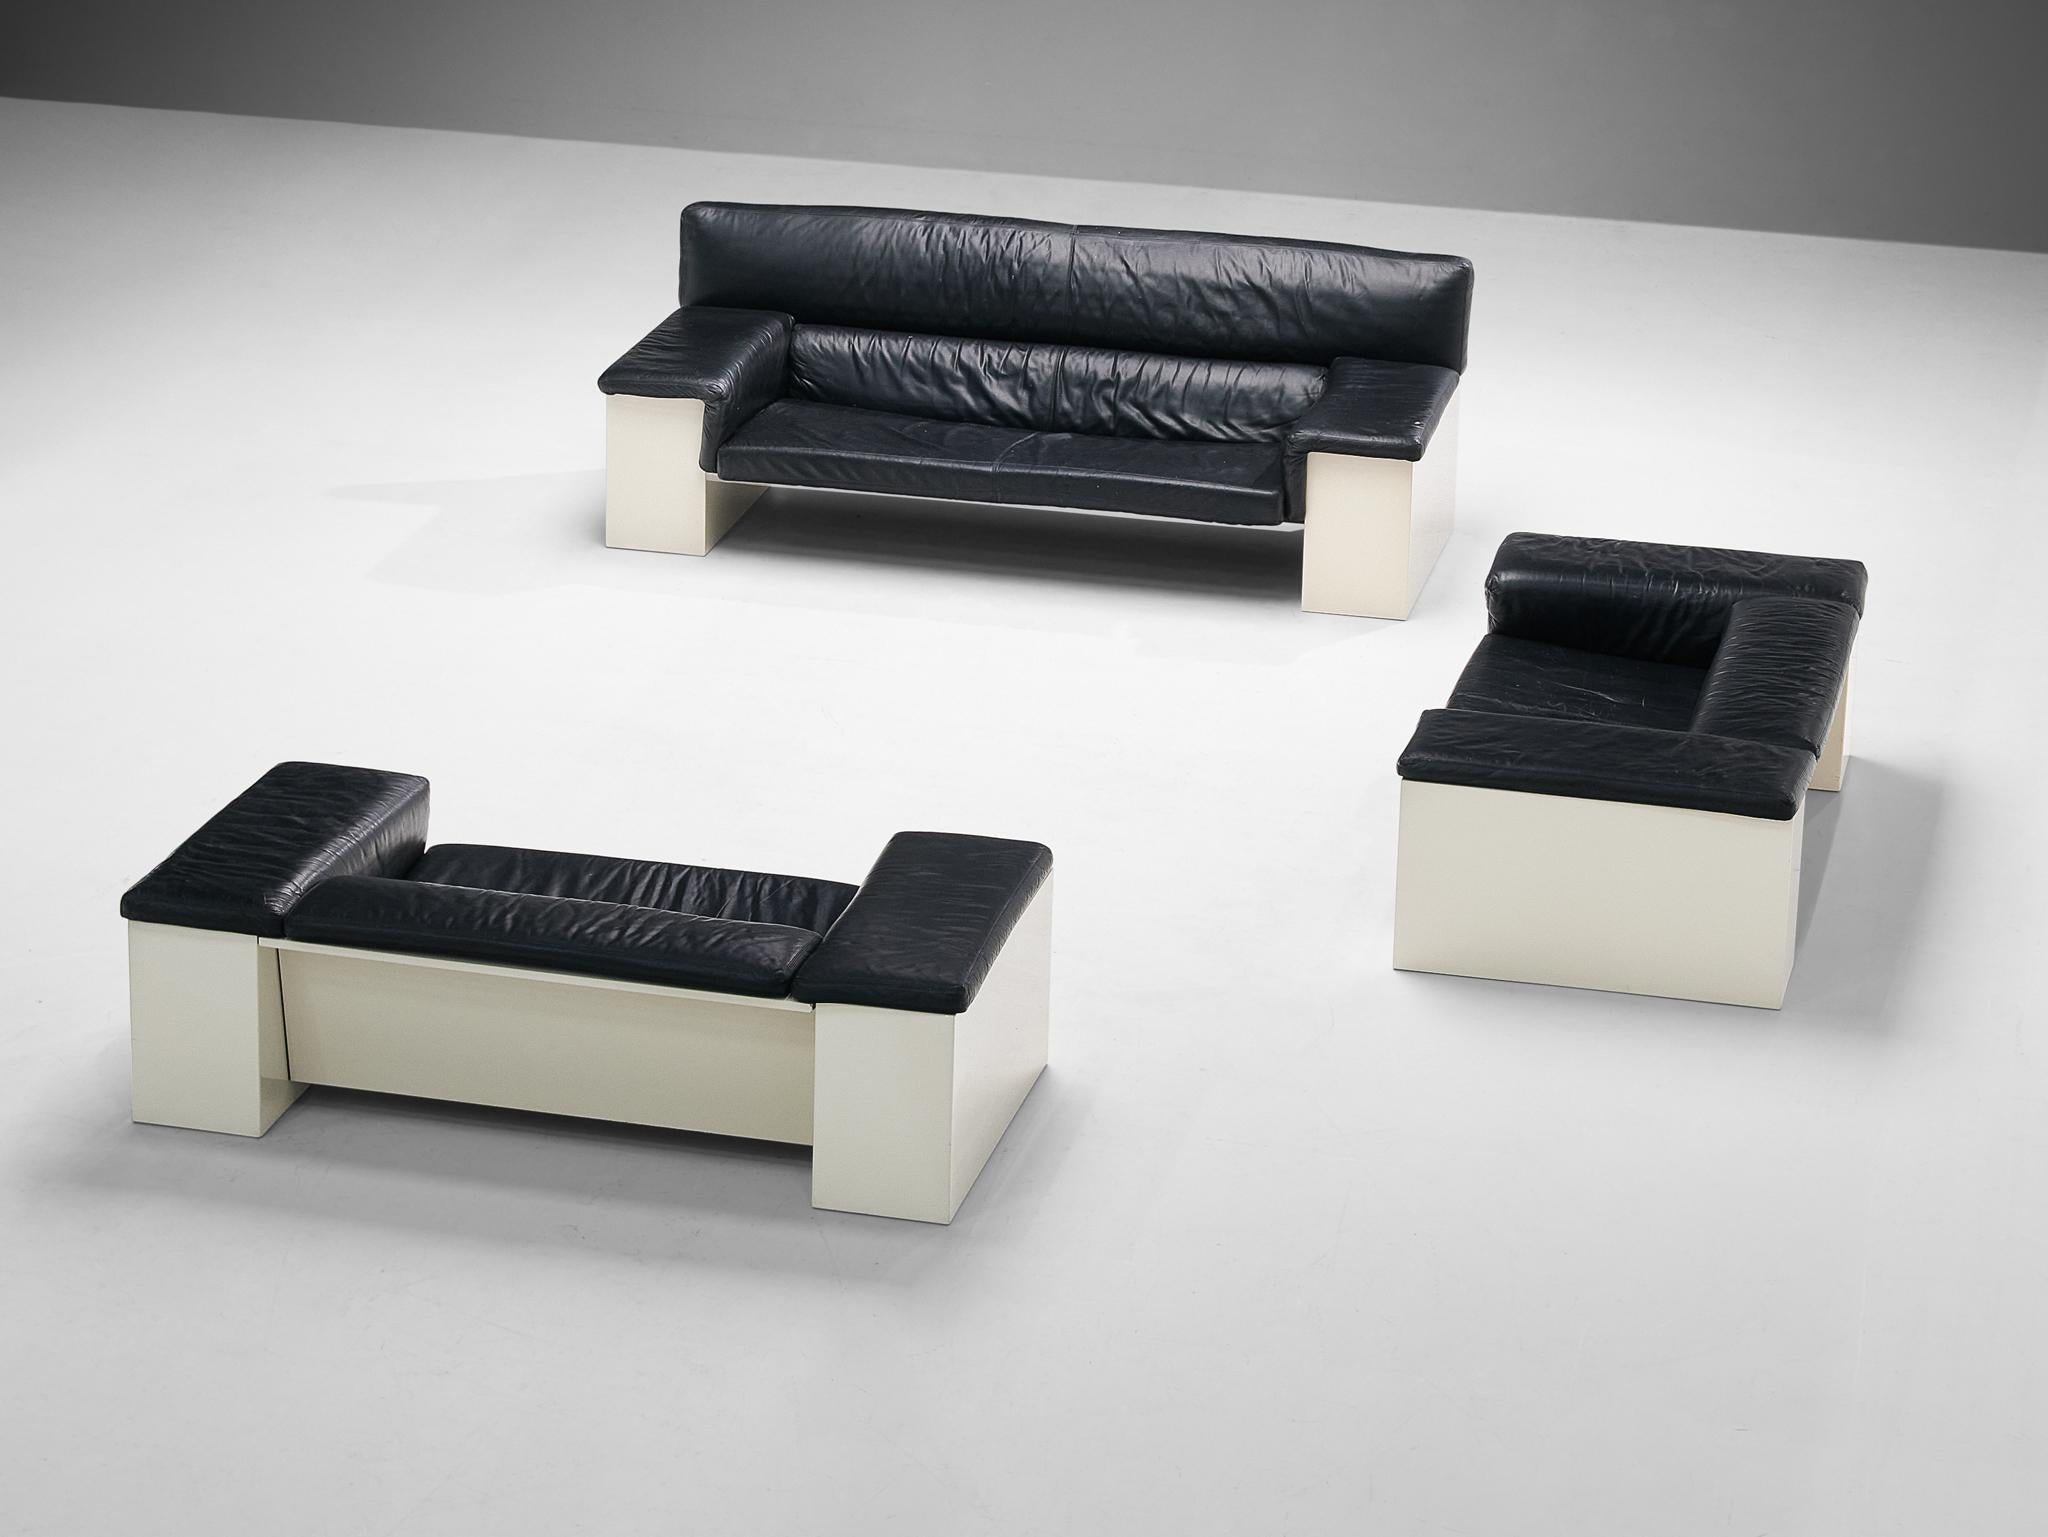 Cini Boeri for Knoll Three Seater Sofa in Black Leather For Sale 2